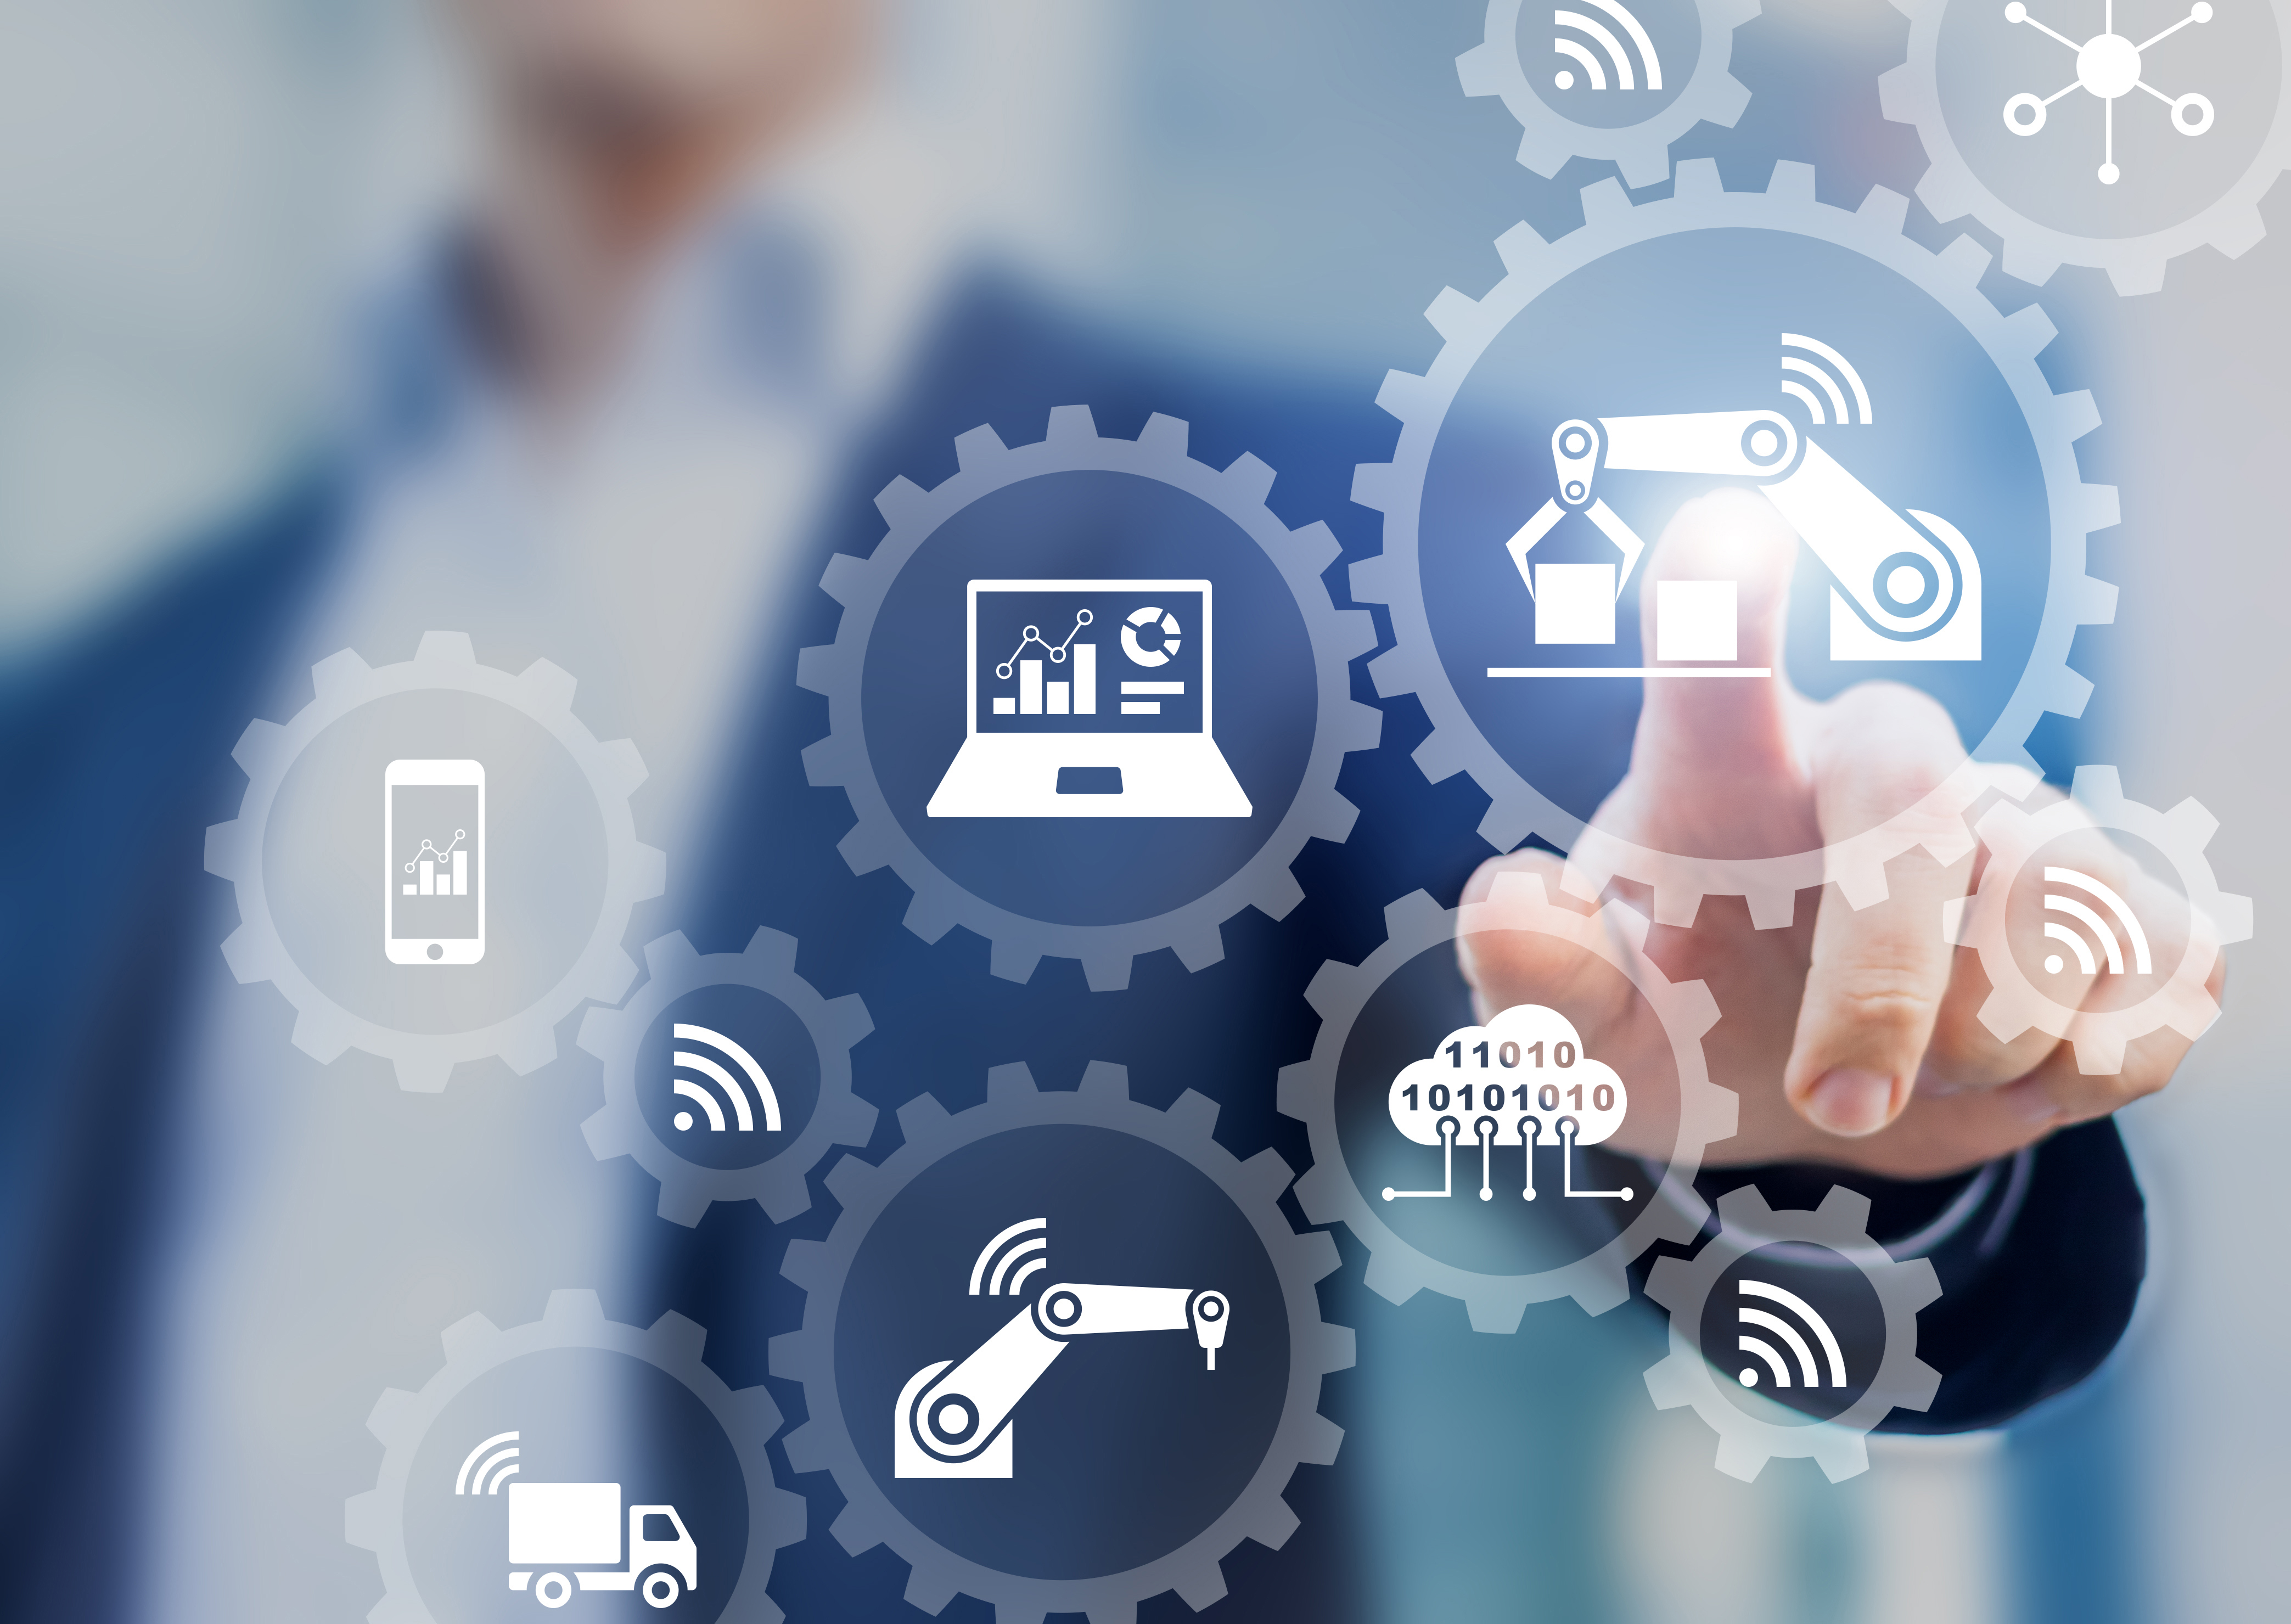 Smart factory and industry 4.0 concept with connected production robots exchanging data with internet of things (IoT) and cloud computing technology, businessman touching interface with icons in gears